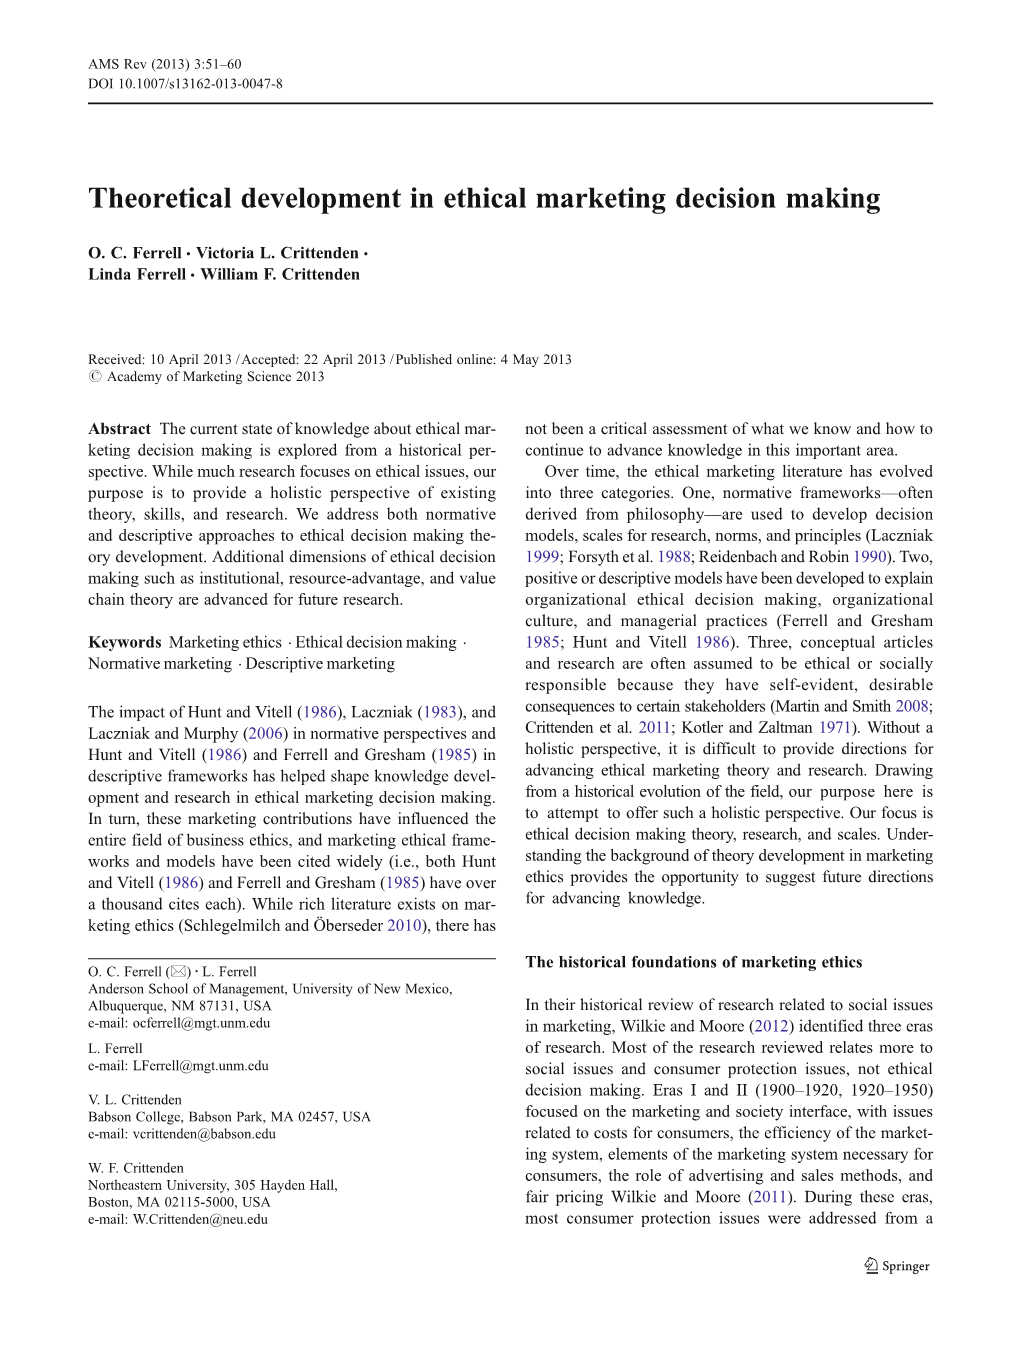 Theoretical Development in Ethical Marketing Decision Making